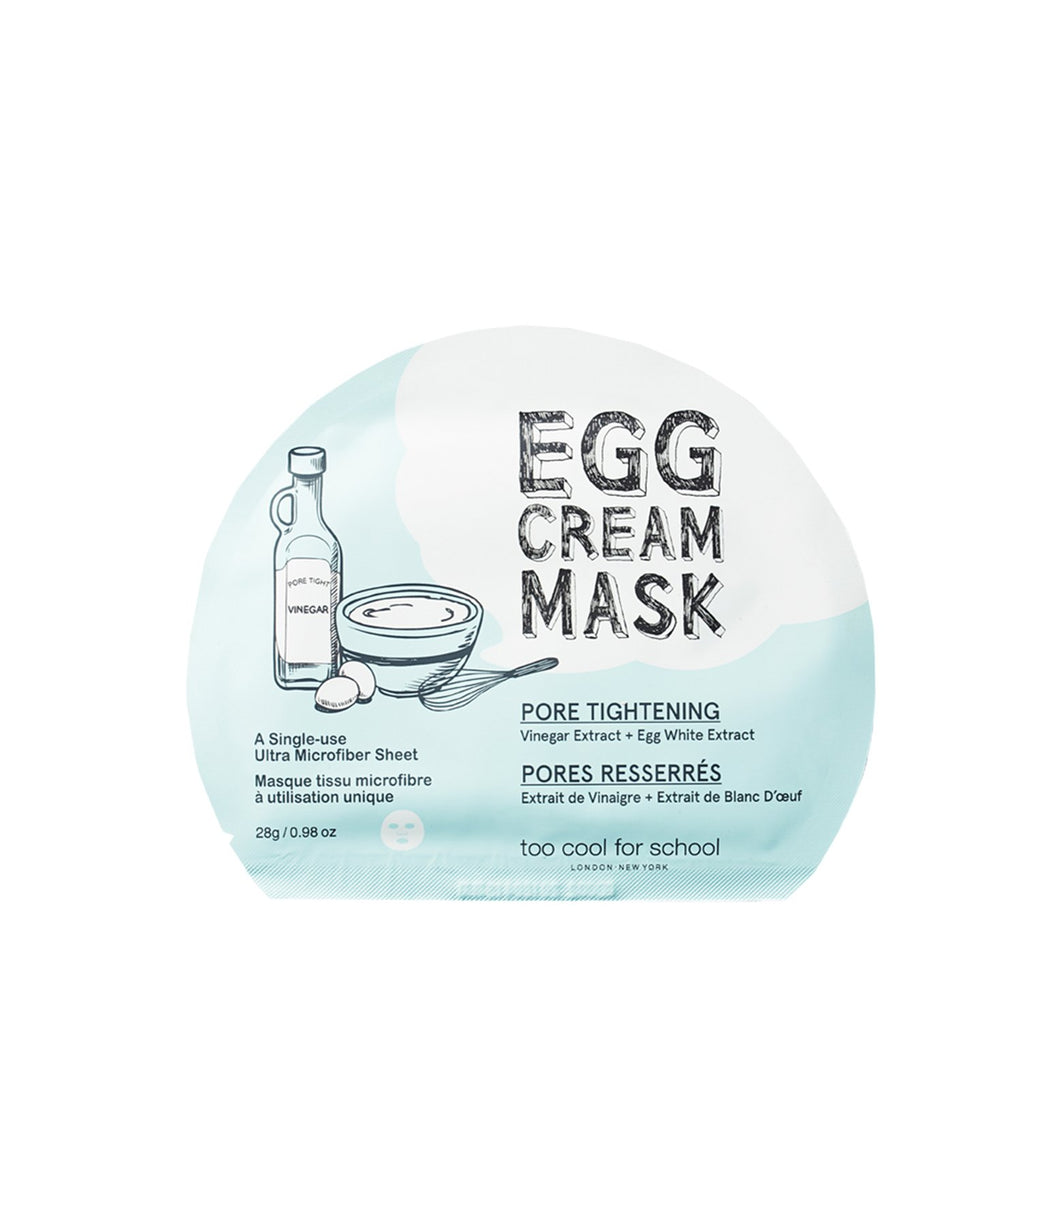 Too Cool For School Egg Cream Mask Pore Tightening - 1 sheet